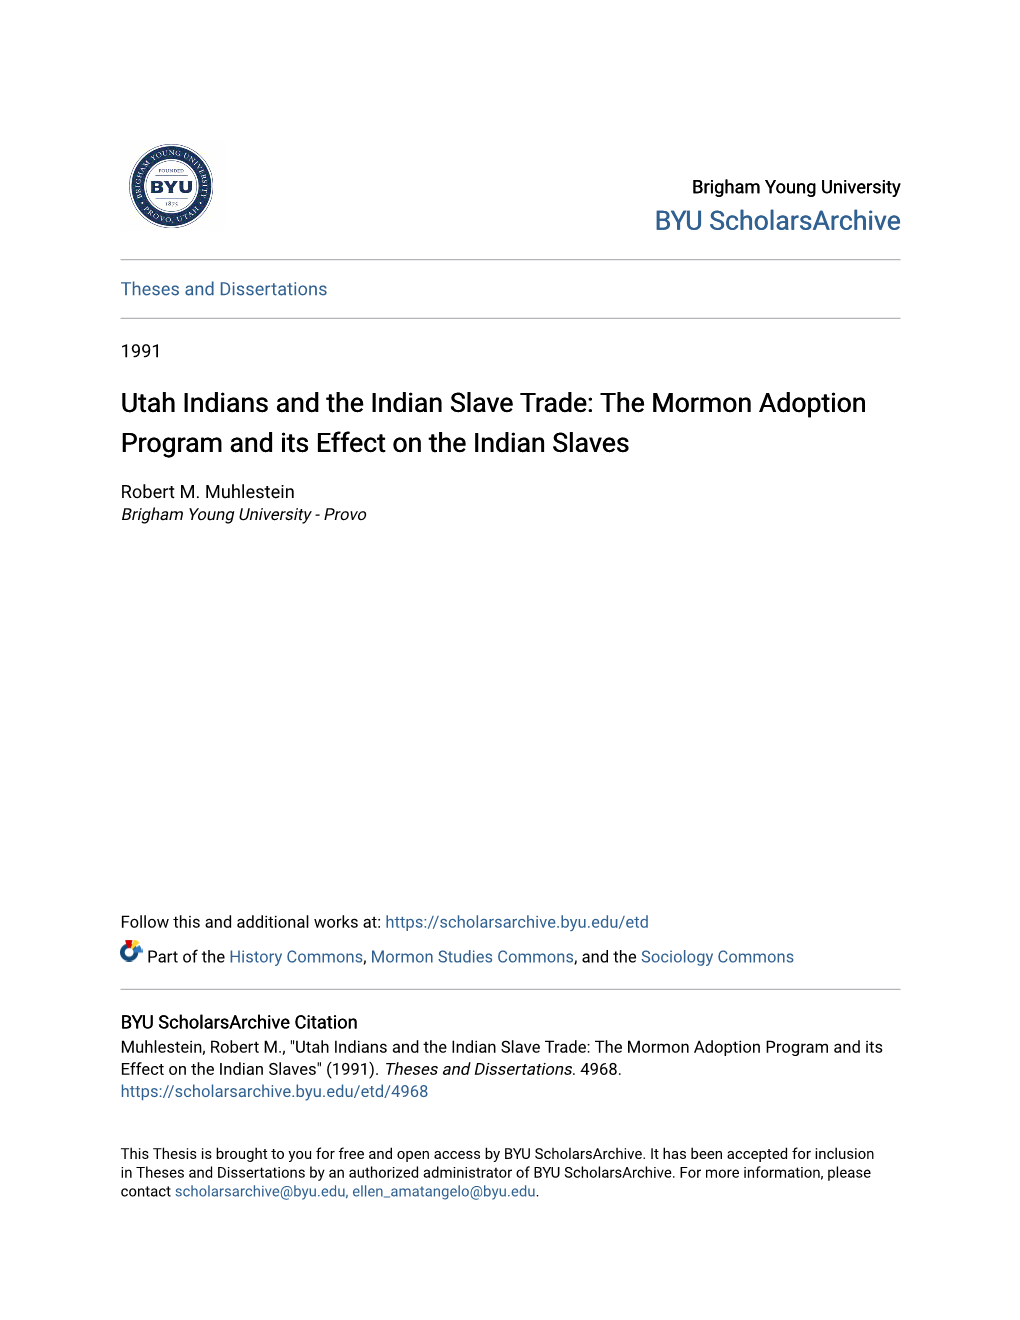 Utah Indians and the Indian Slave Trade: the Mormon Adoption Program and Its Effect on the Indian Slaves